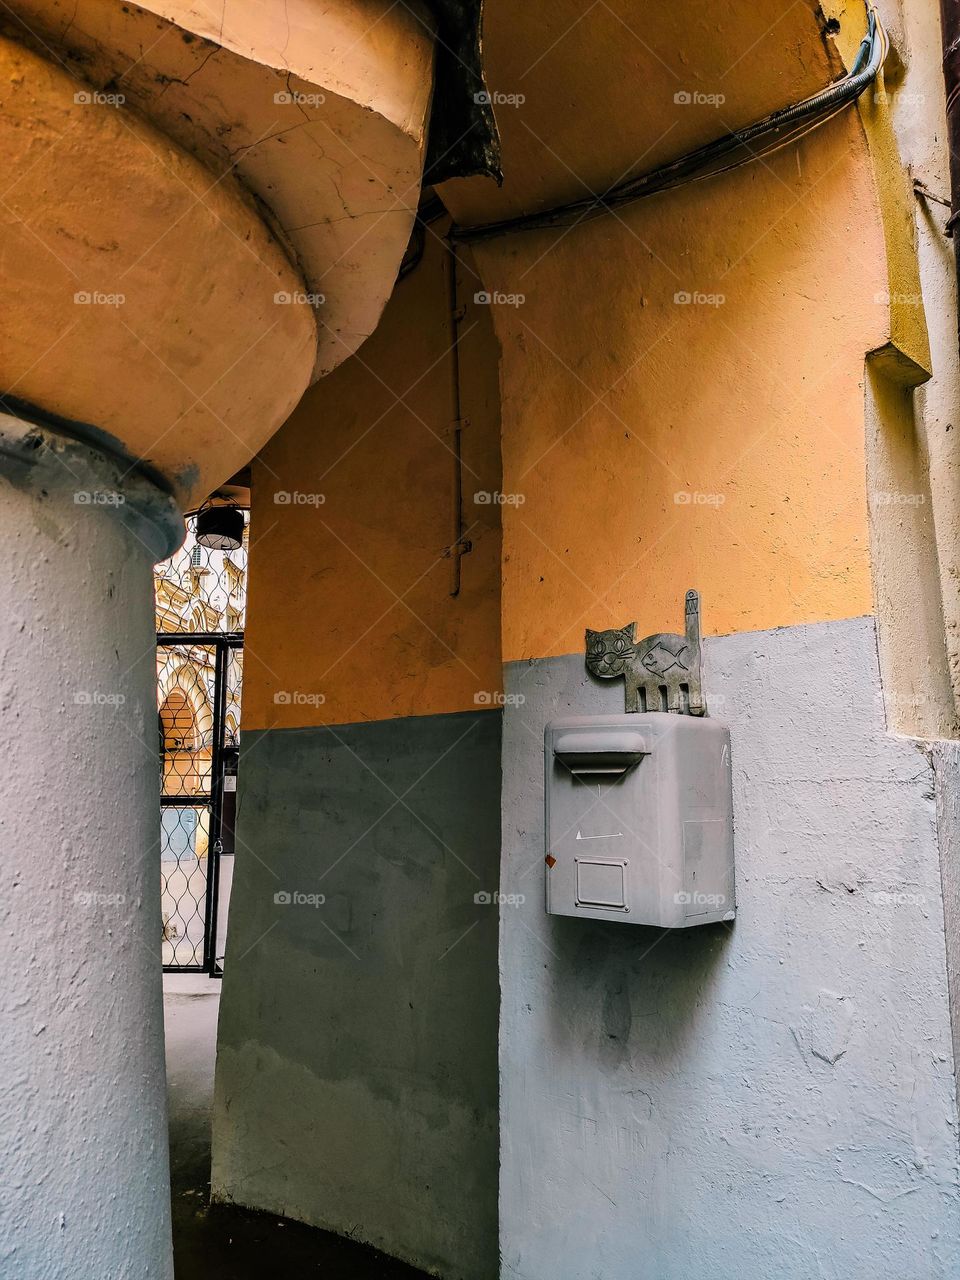 mailbox with a cat